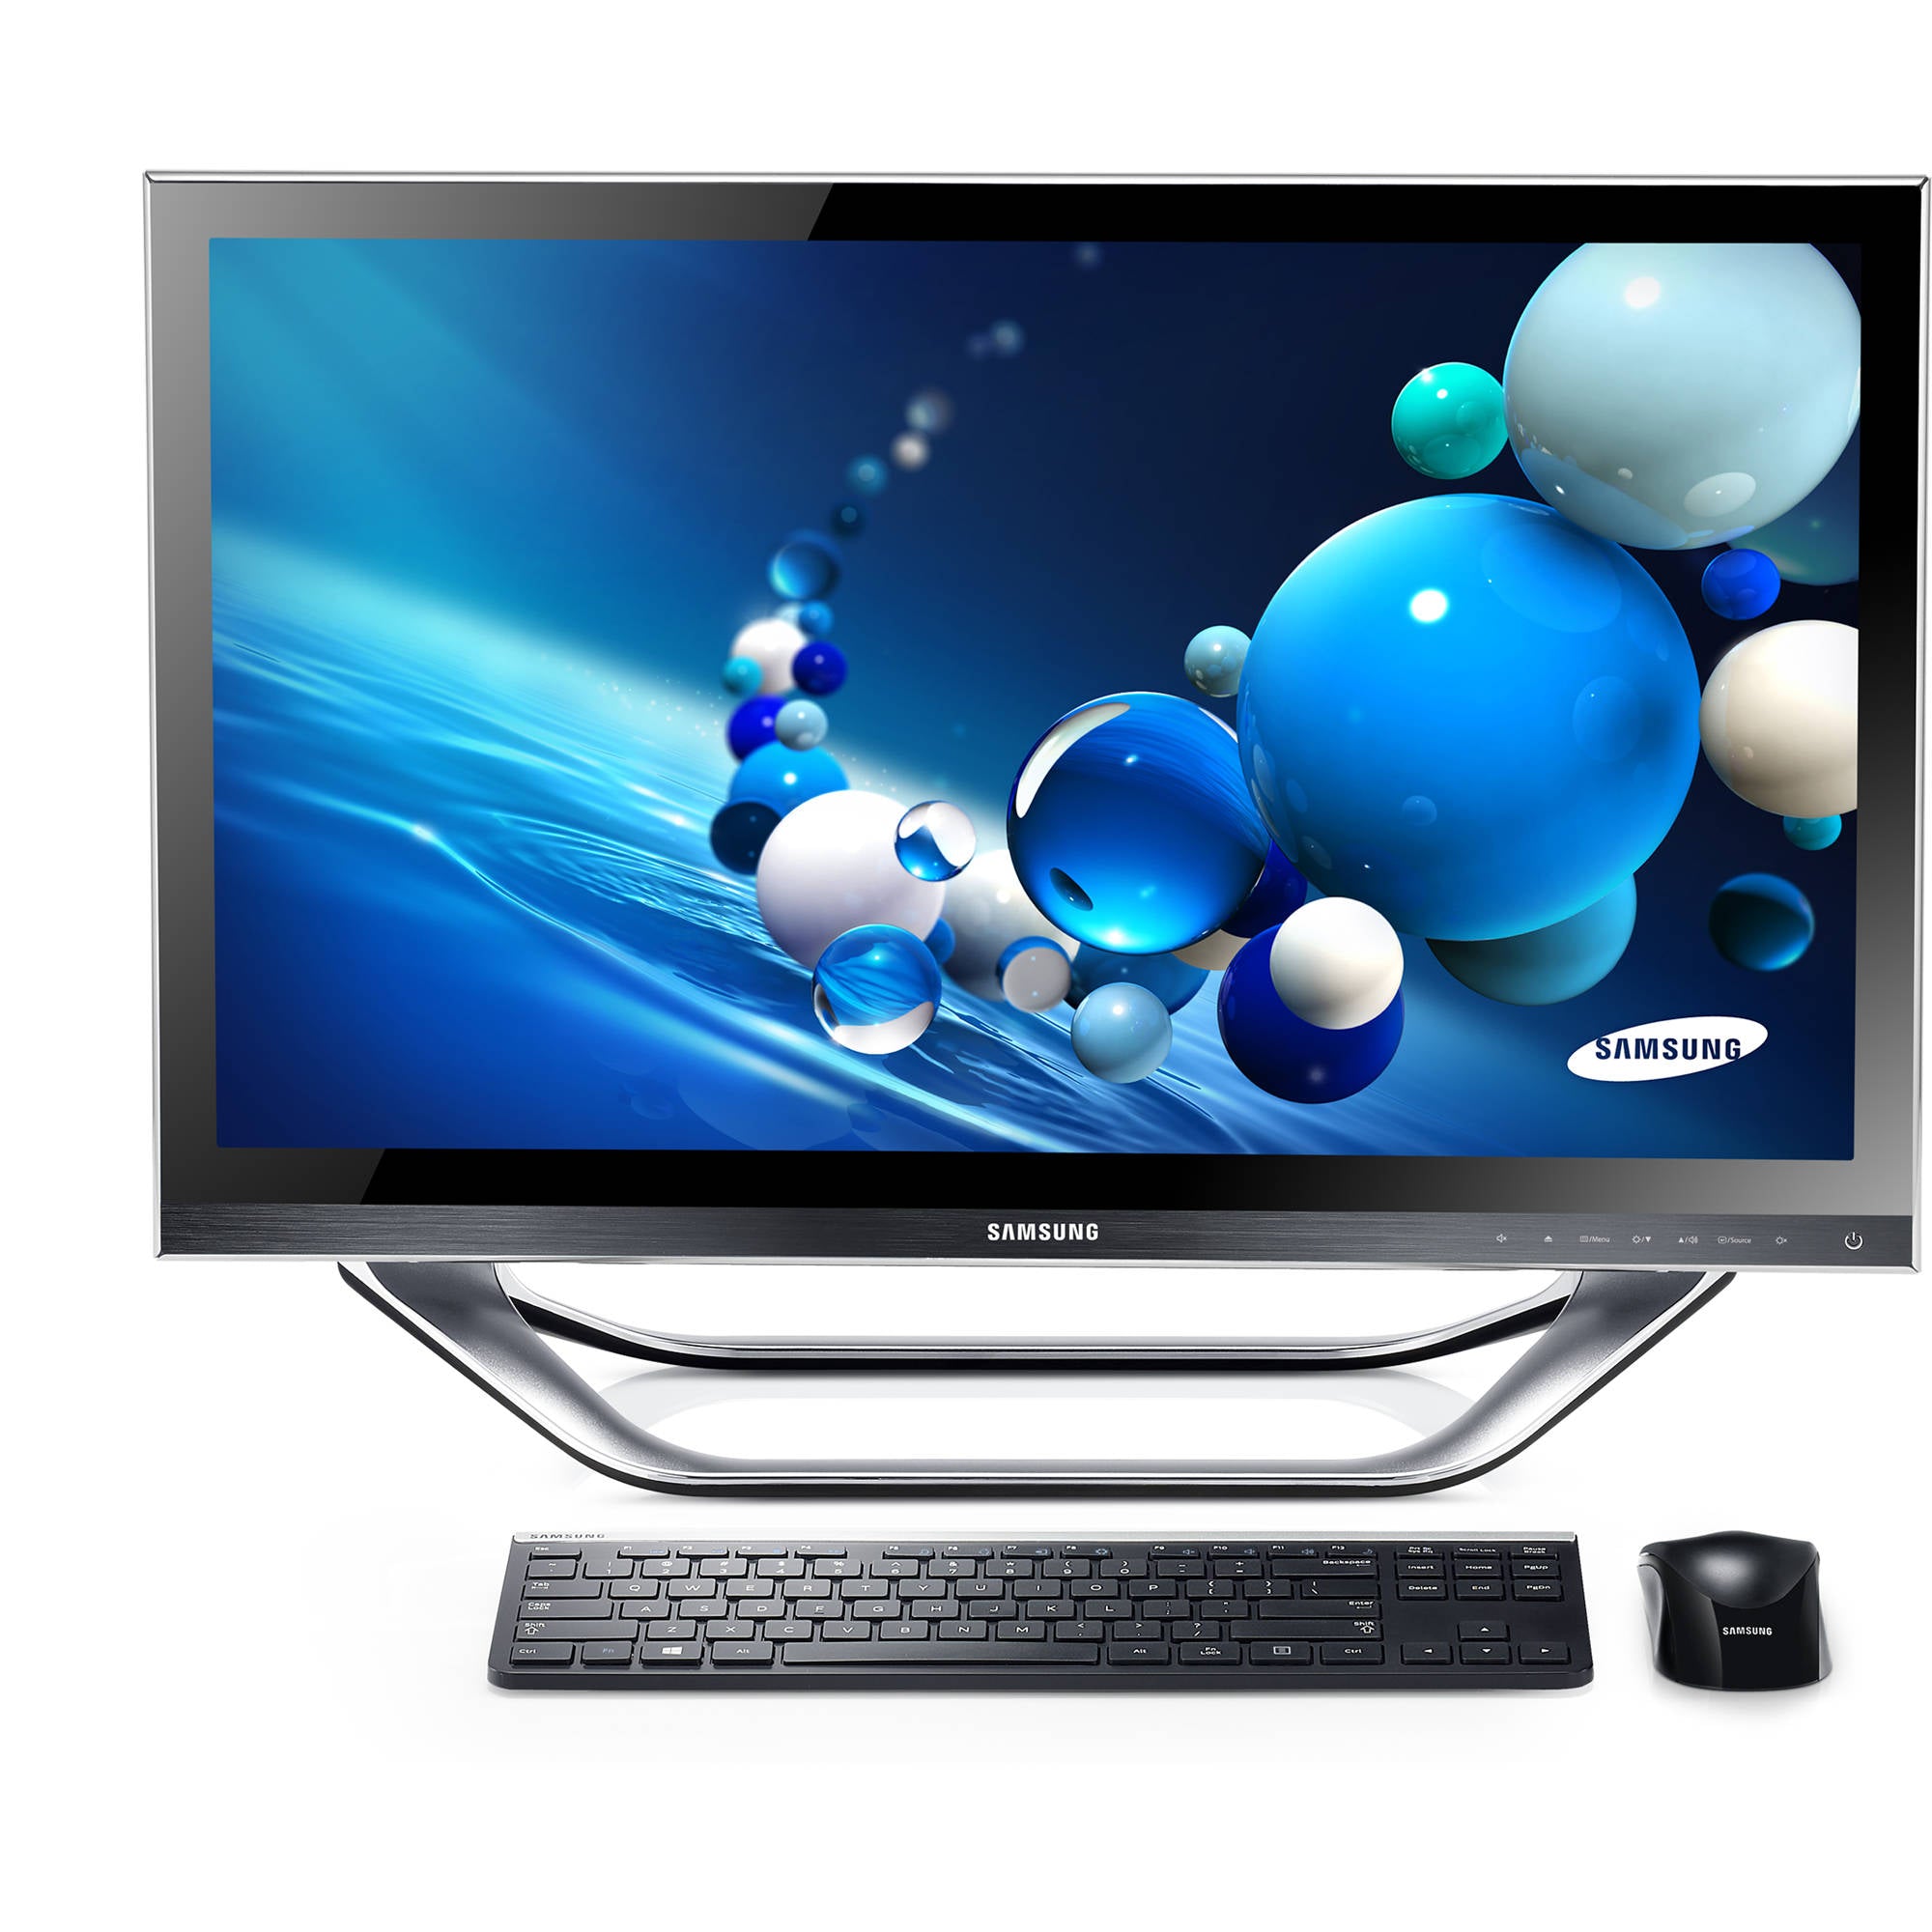 Samsung DP700A7DS01US Series 7 - 27-Inch All-in-one Touchscreen Desktop